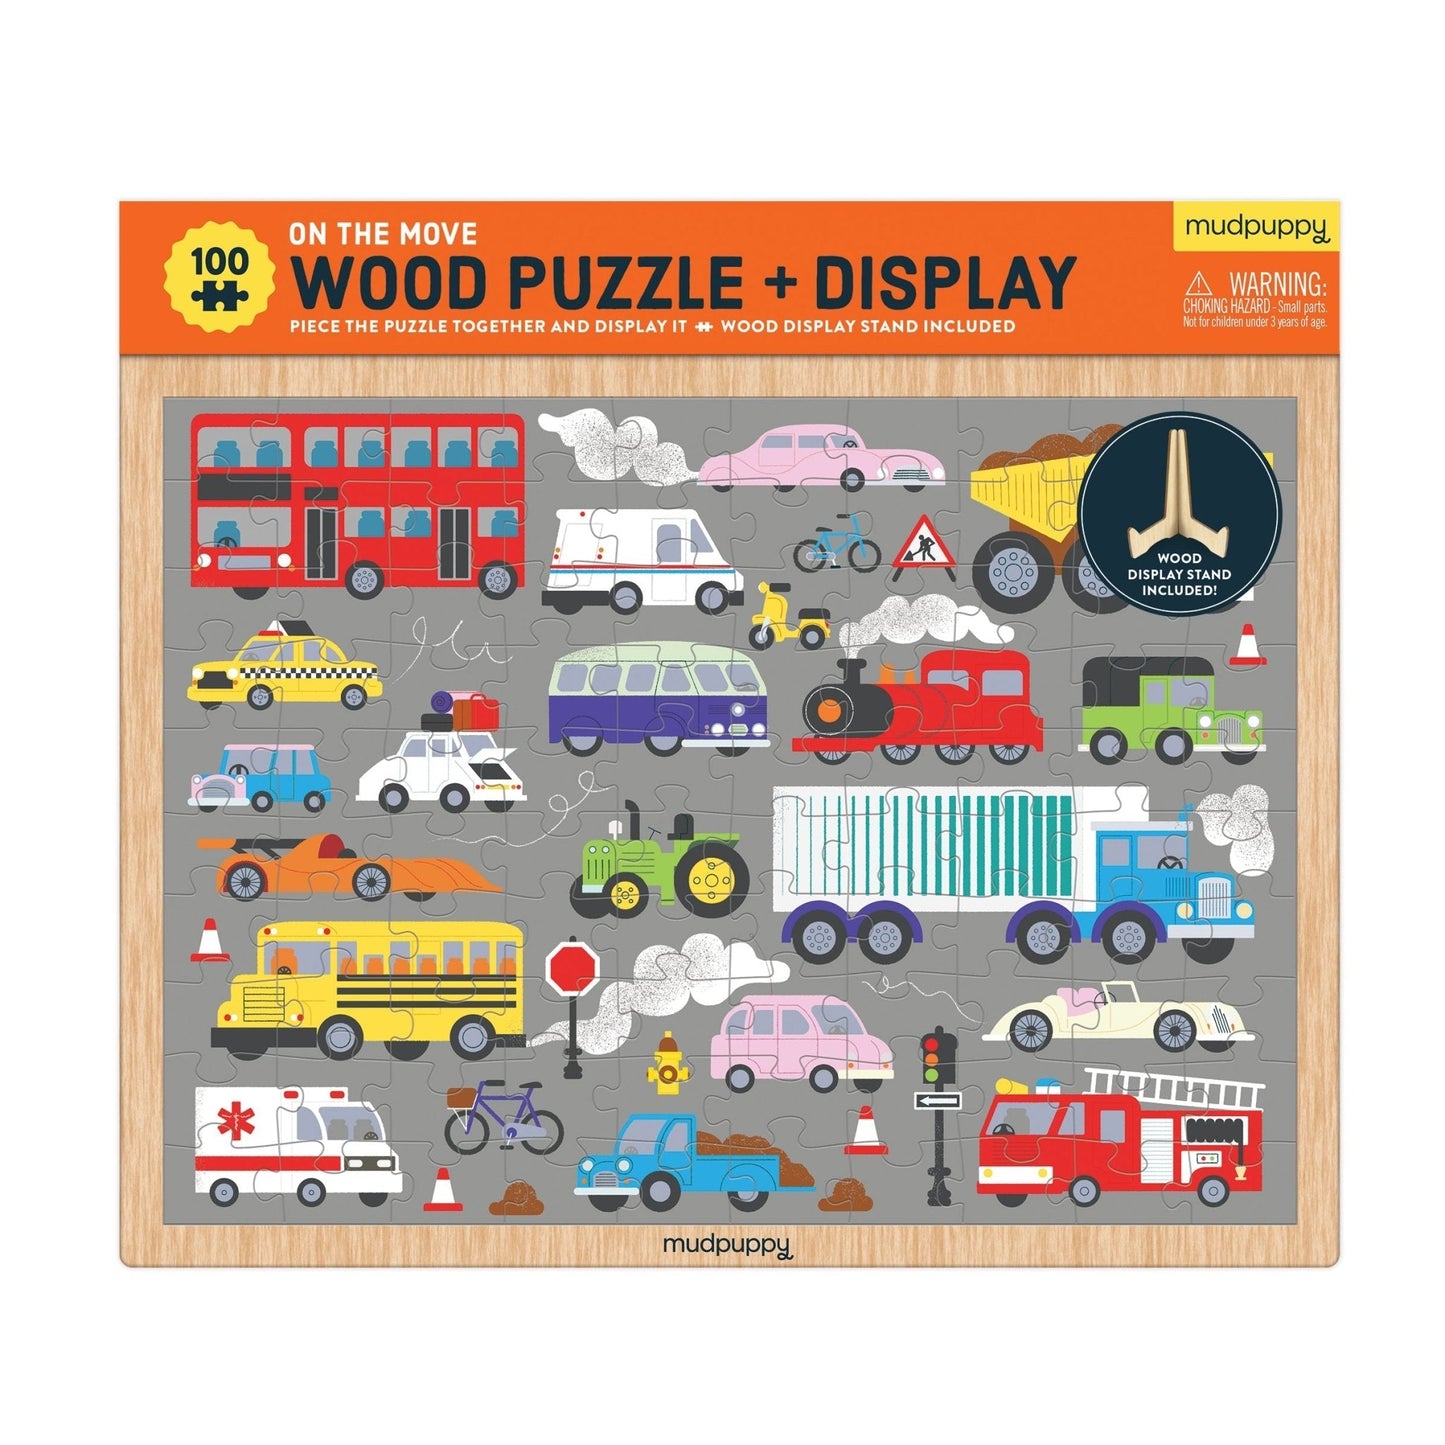 On the Move 100 Piece Wooden Puzzle with Display